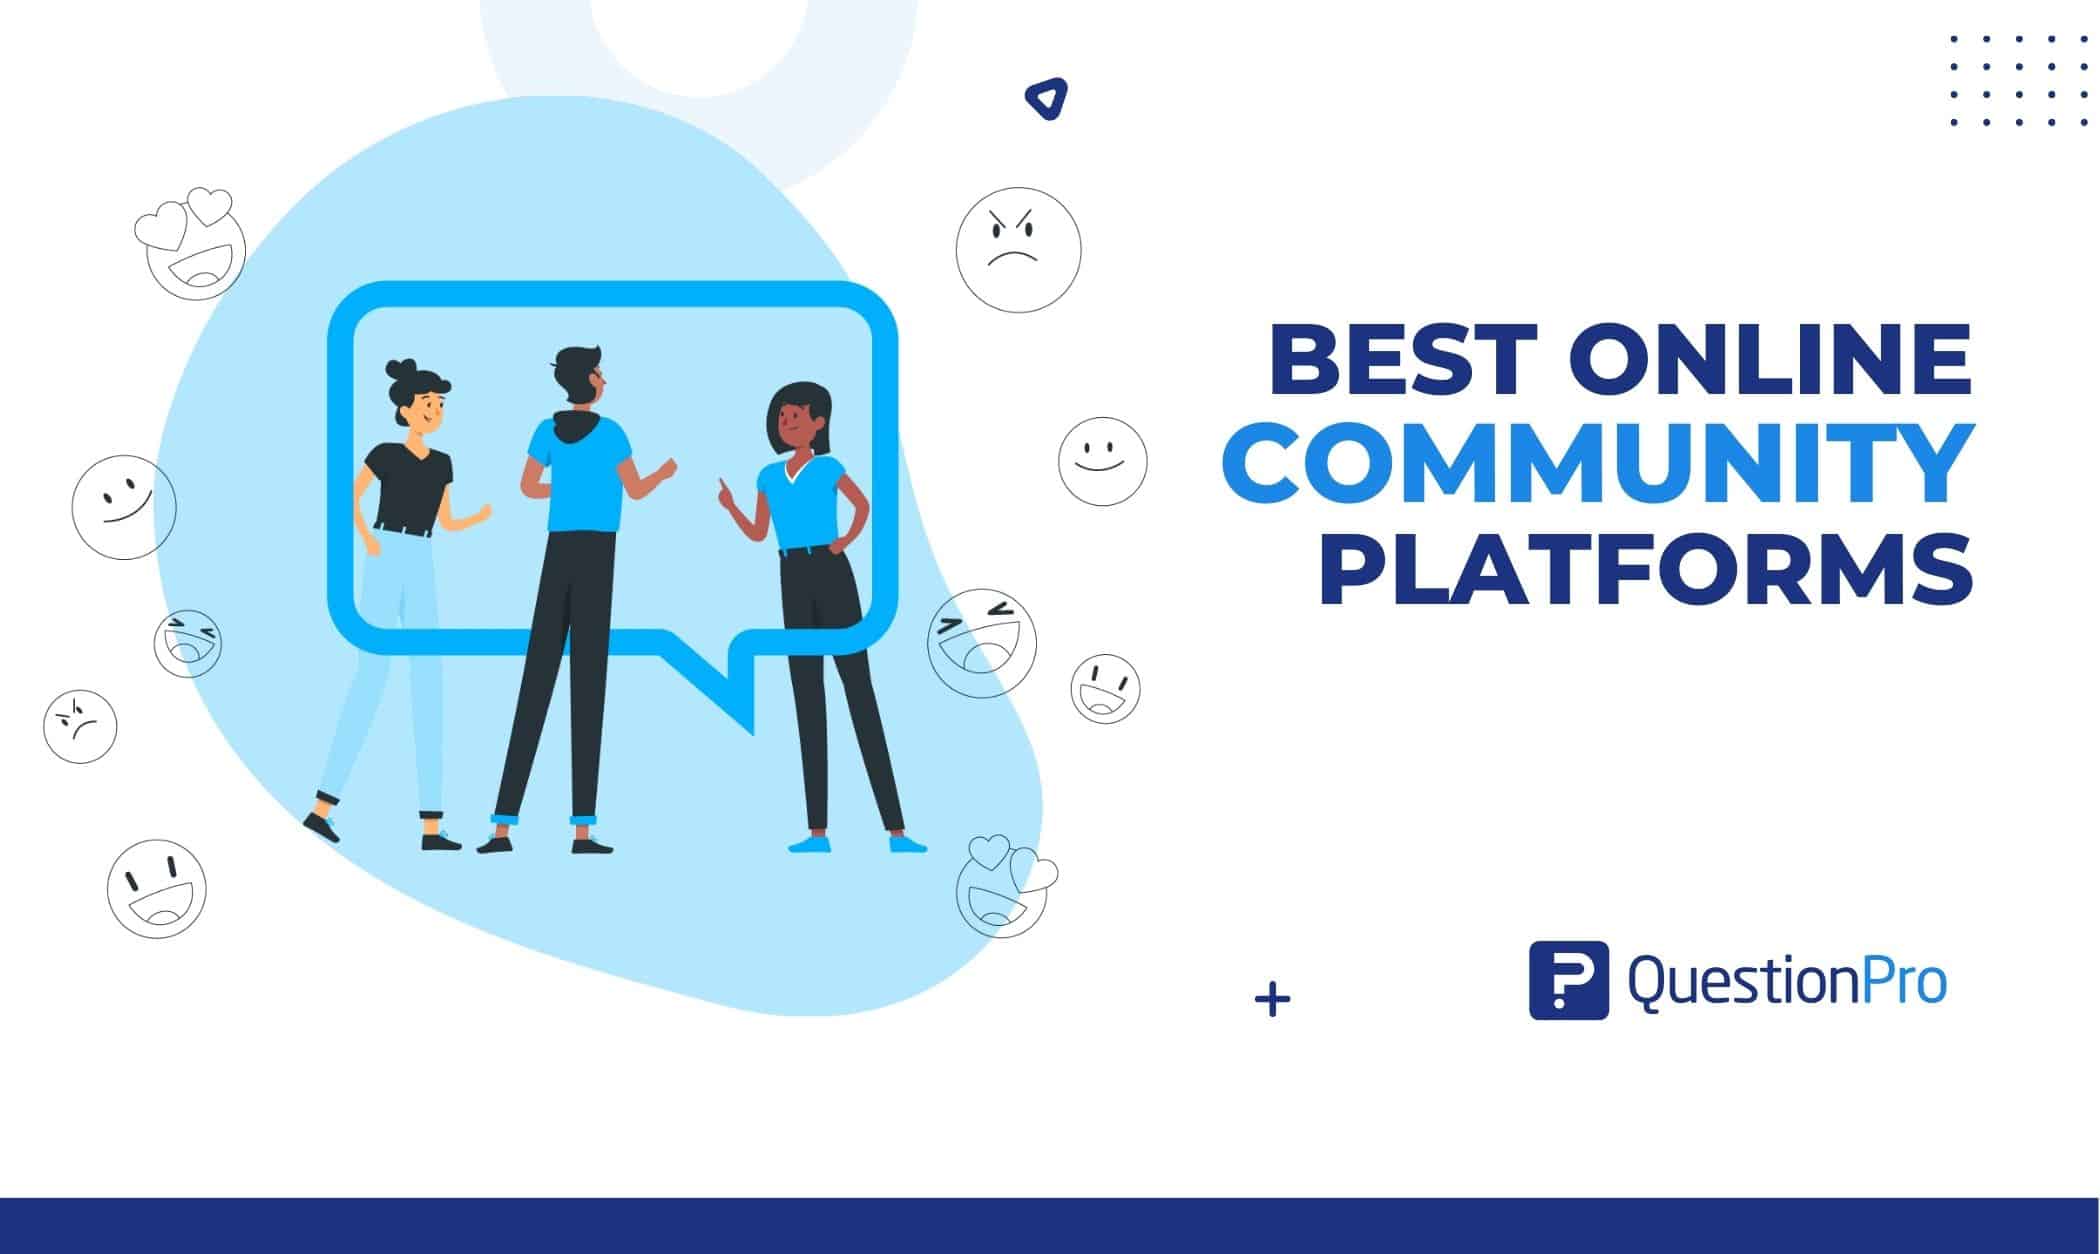 Online community platforms facilitate interactions and assist in-person gatherings. We'll discuss the 10 best online community platforms.